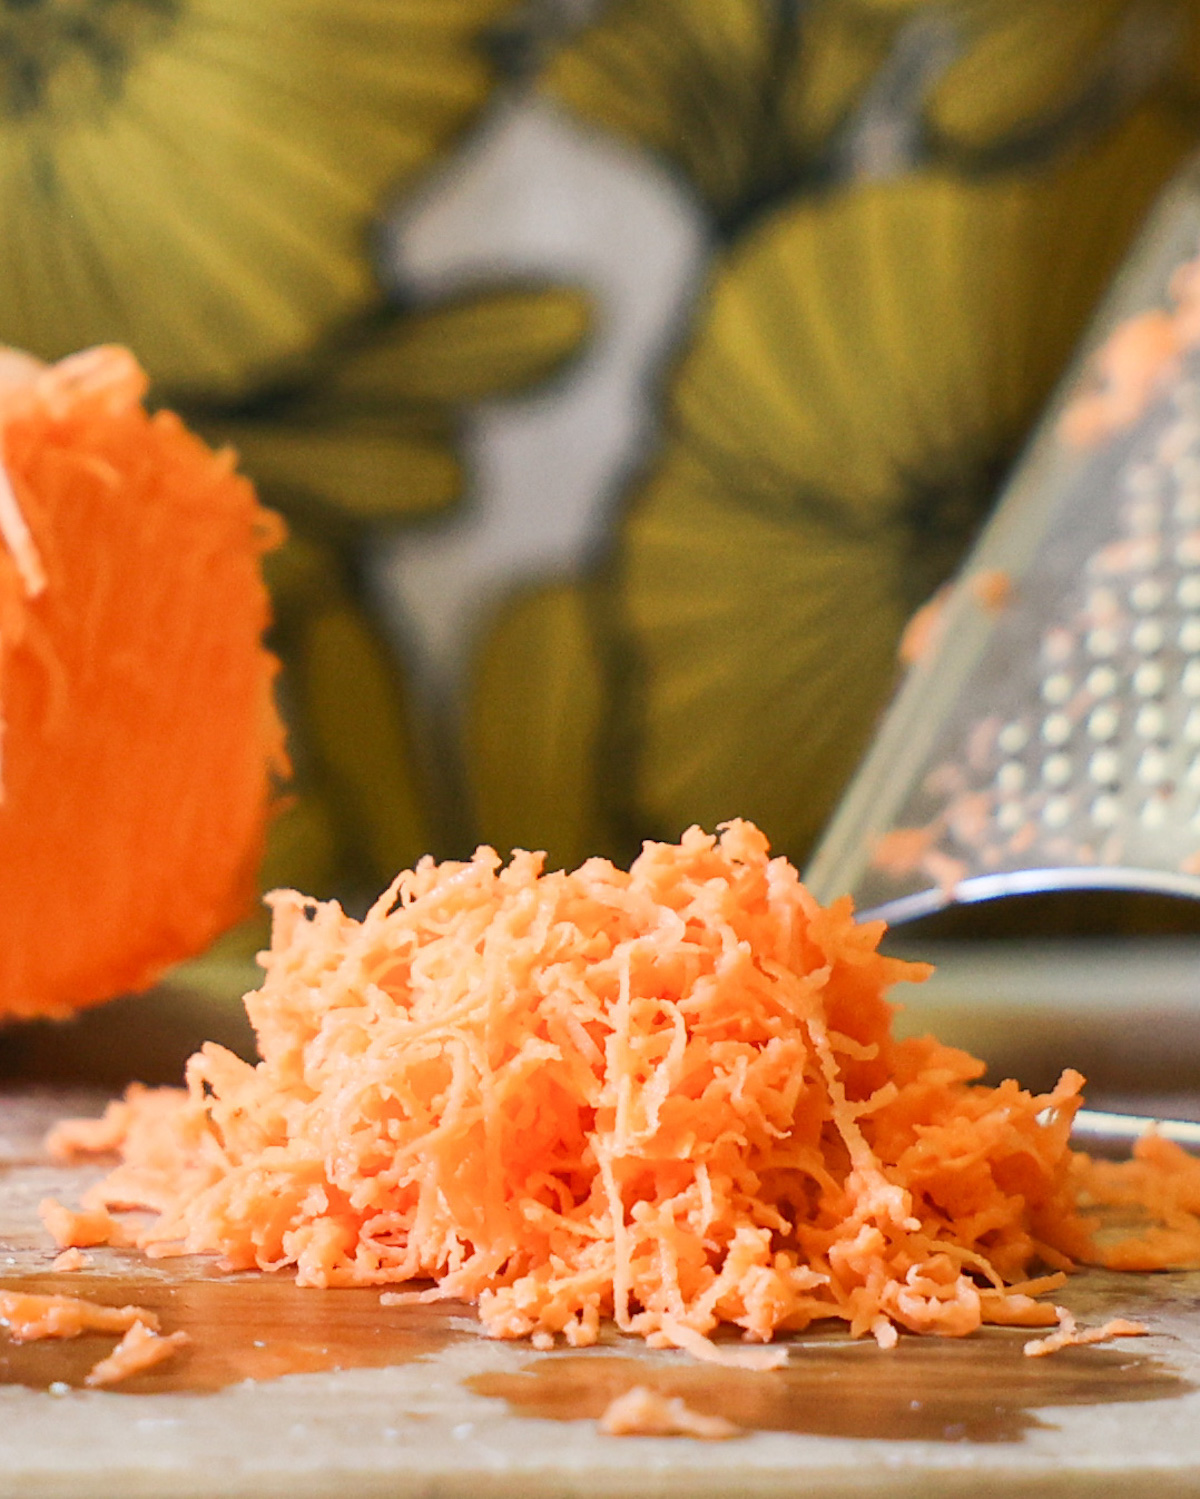 An up-close side shot of shredded sweet potato on a cutting board.